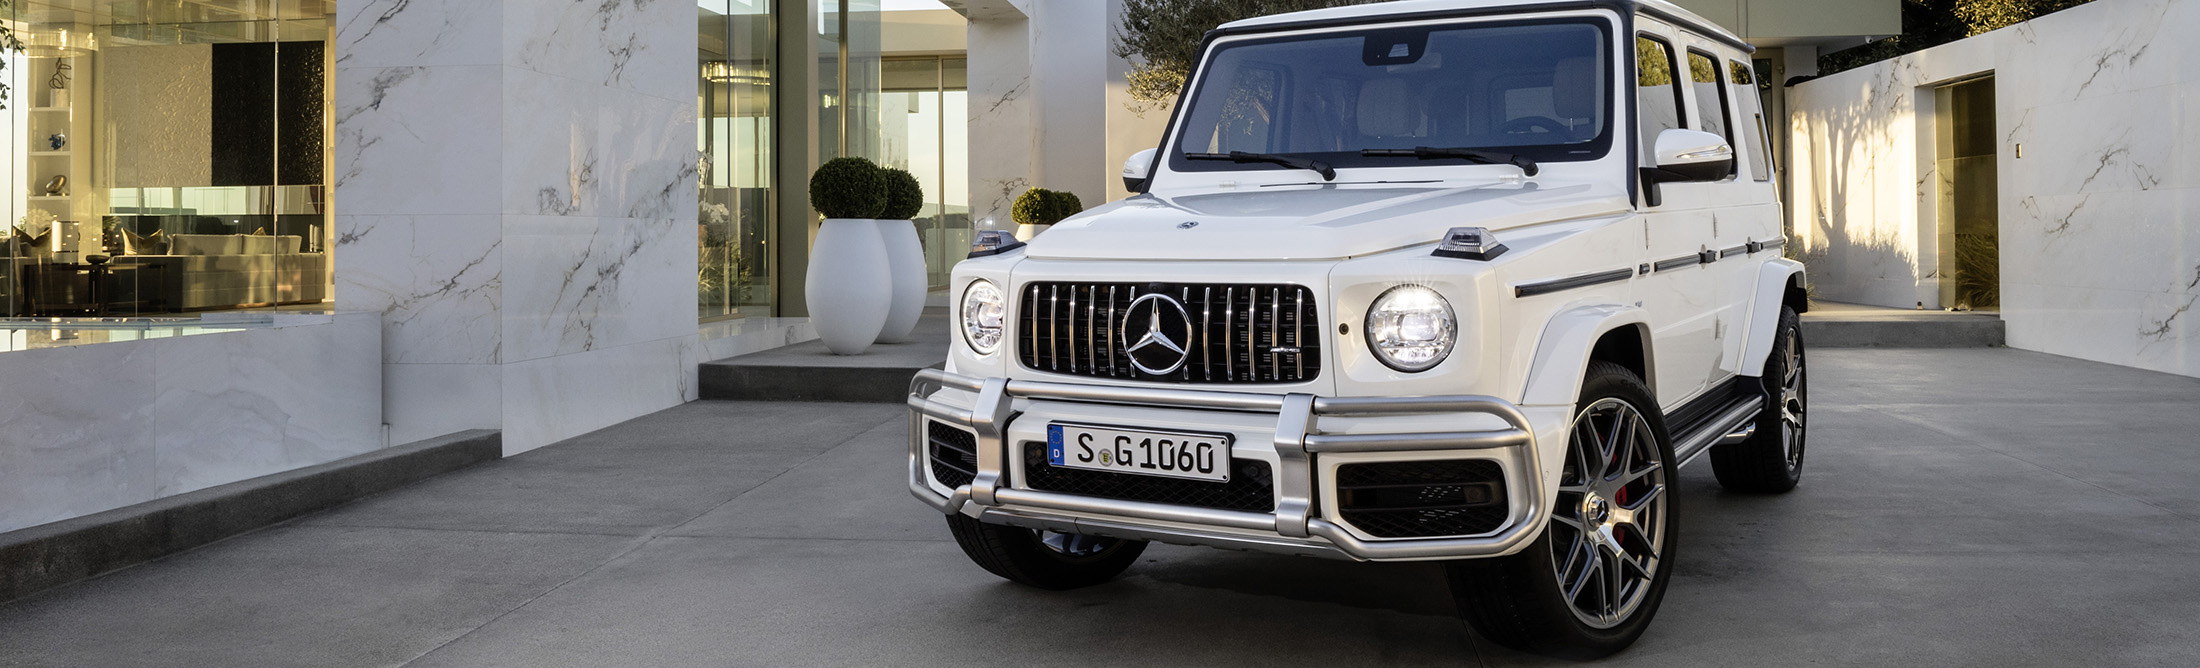 Want to Buy the New Mercedes G-Wagen? Here's What You Need to Know